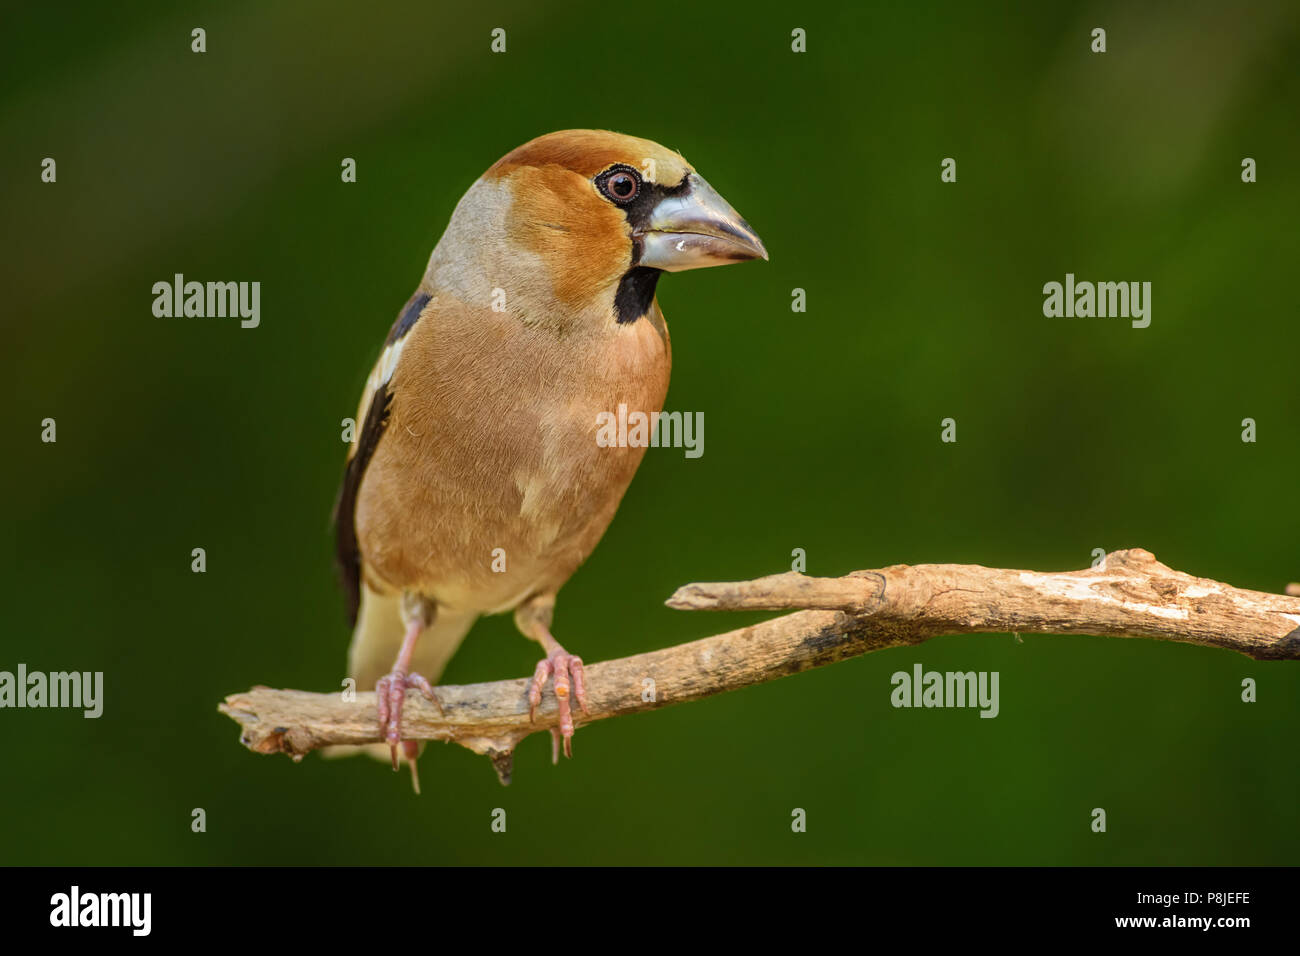 Hawfinch - Coccothraustes coccothraustes, beautiful colored perching bird from Old World forests. Stock Photo